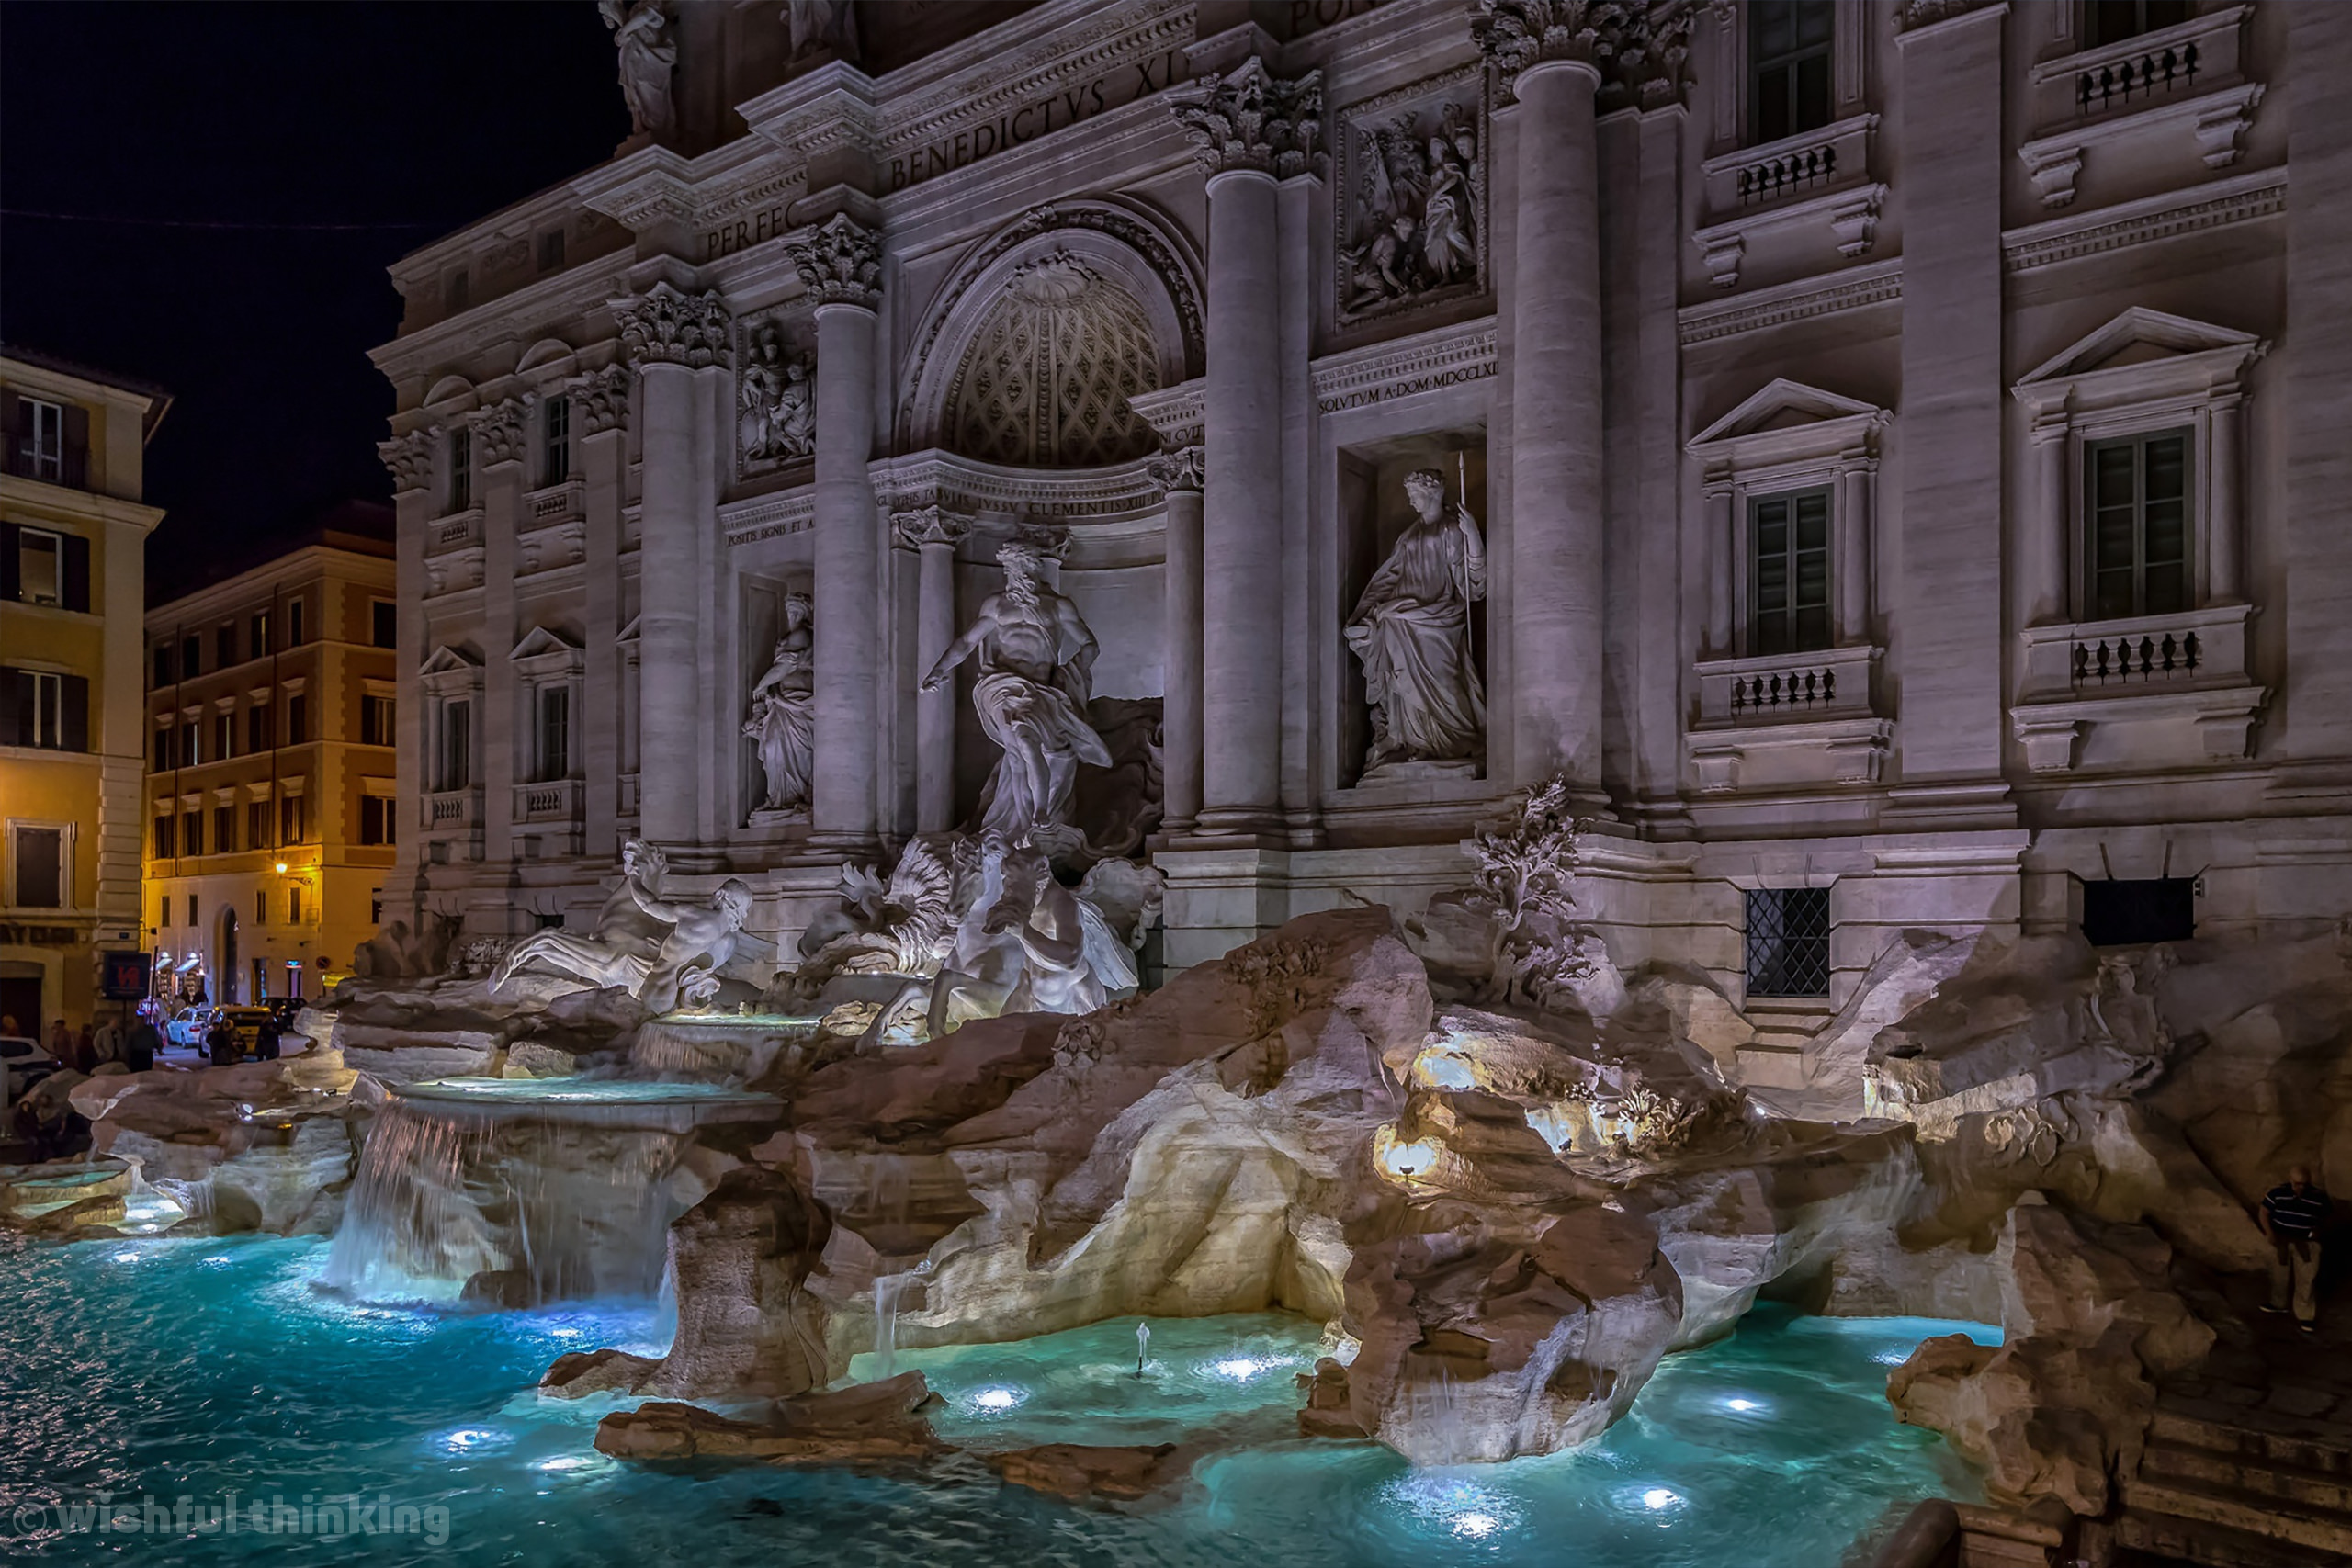 Trevi Fountain in Rome, where cascading waterfalls flow over classical marble sculptures, invite visitors to toss coins in wishful hopes of finding love in Rome